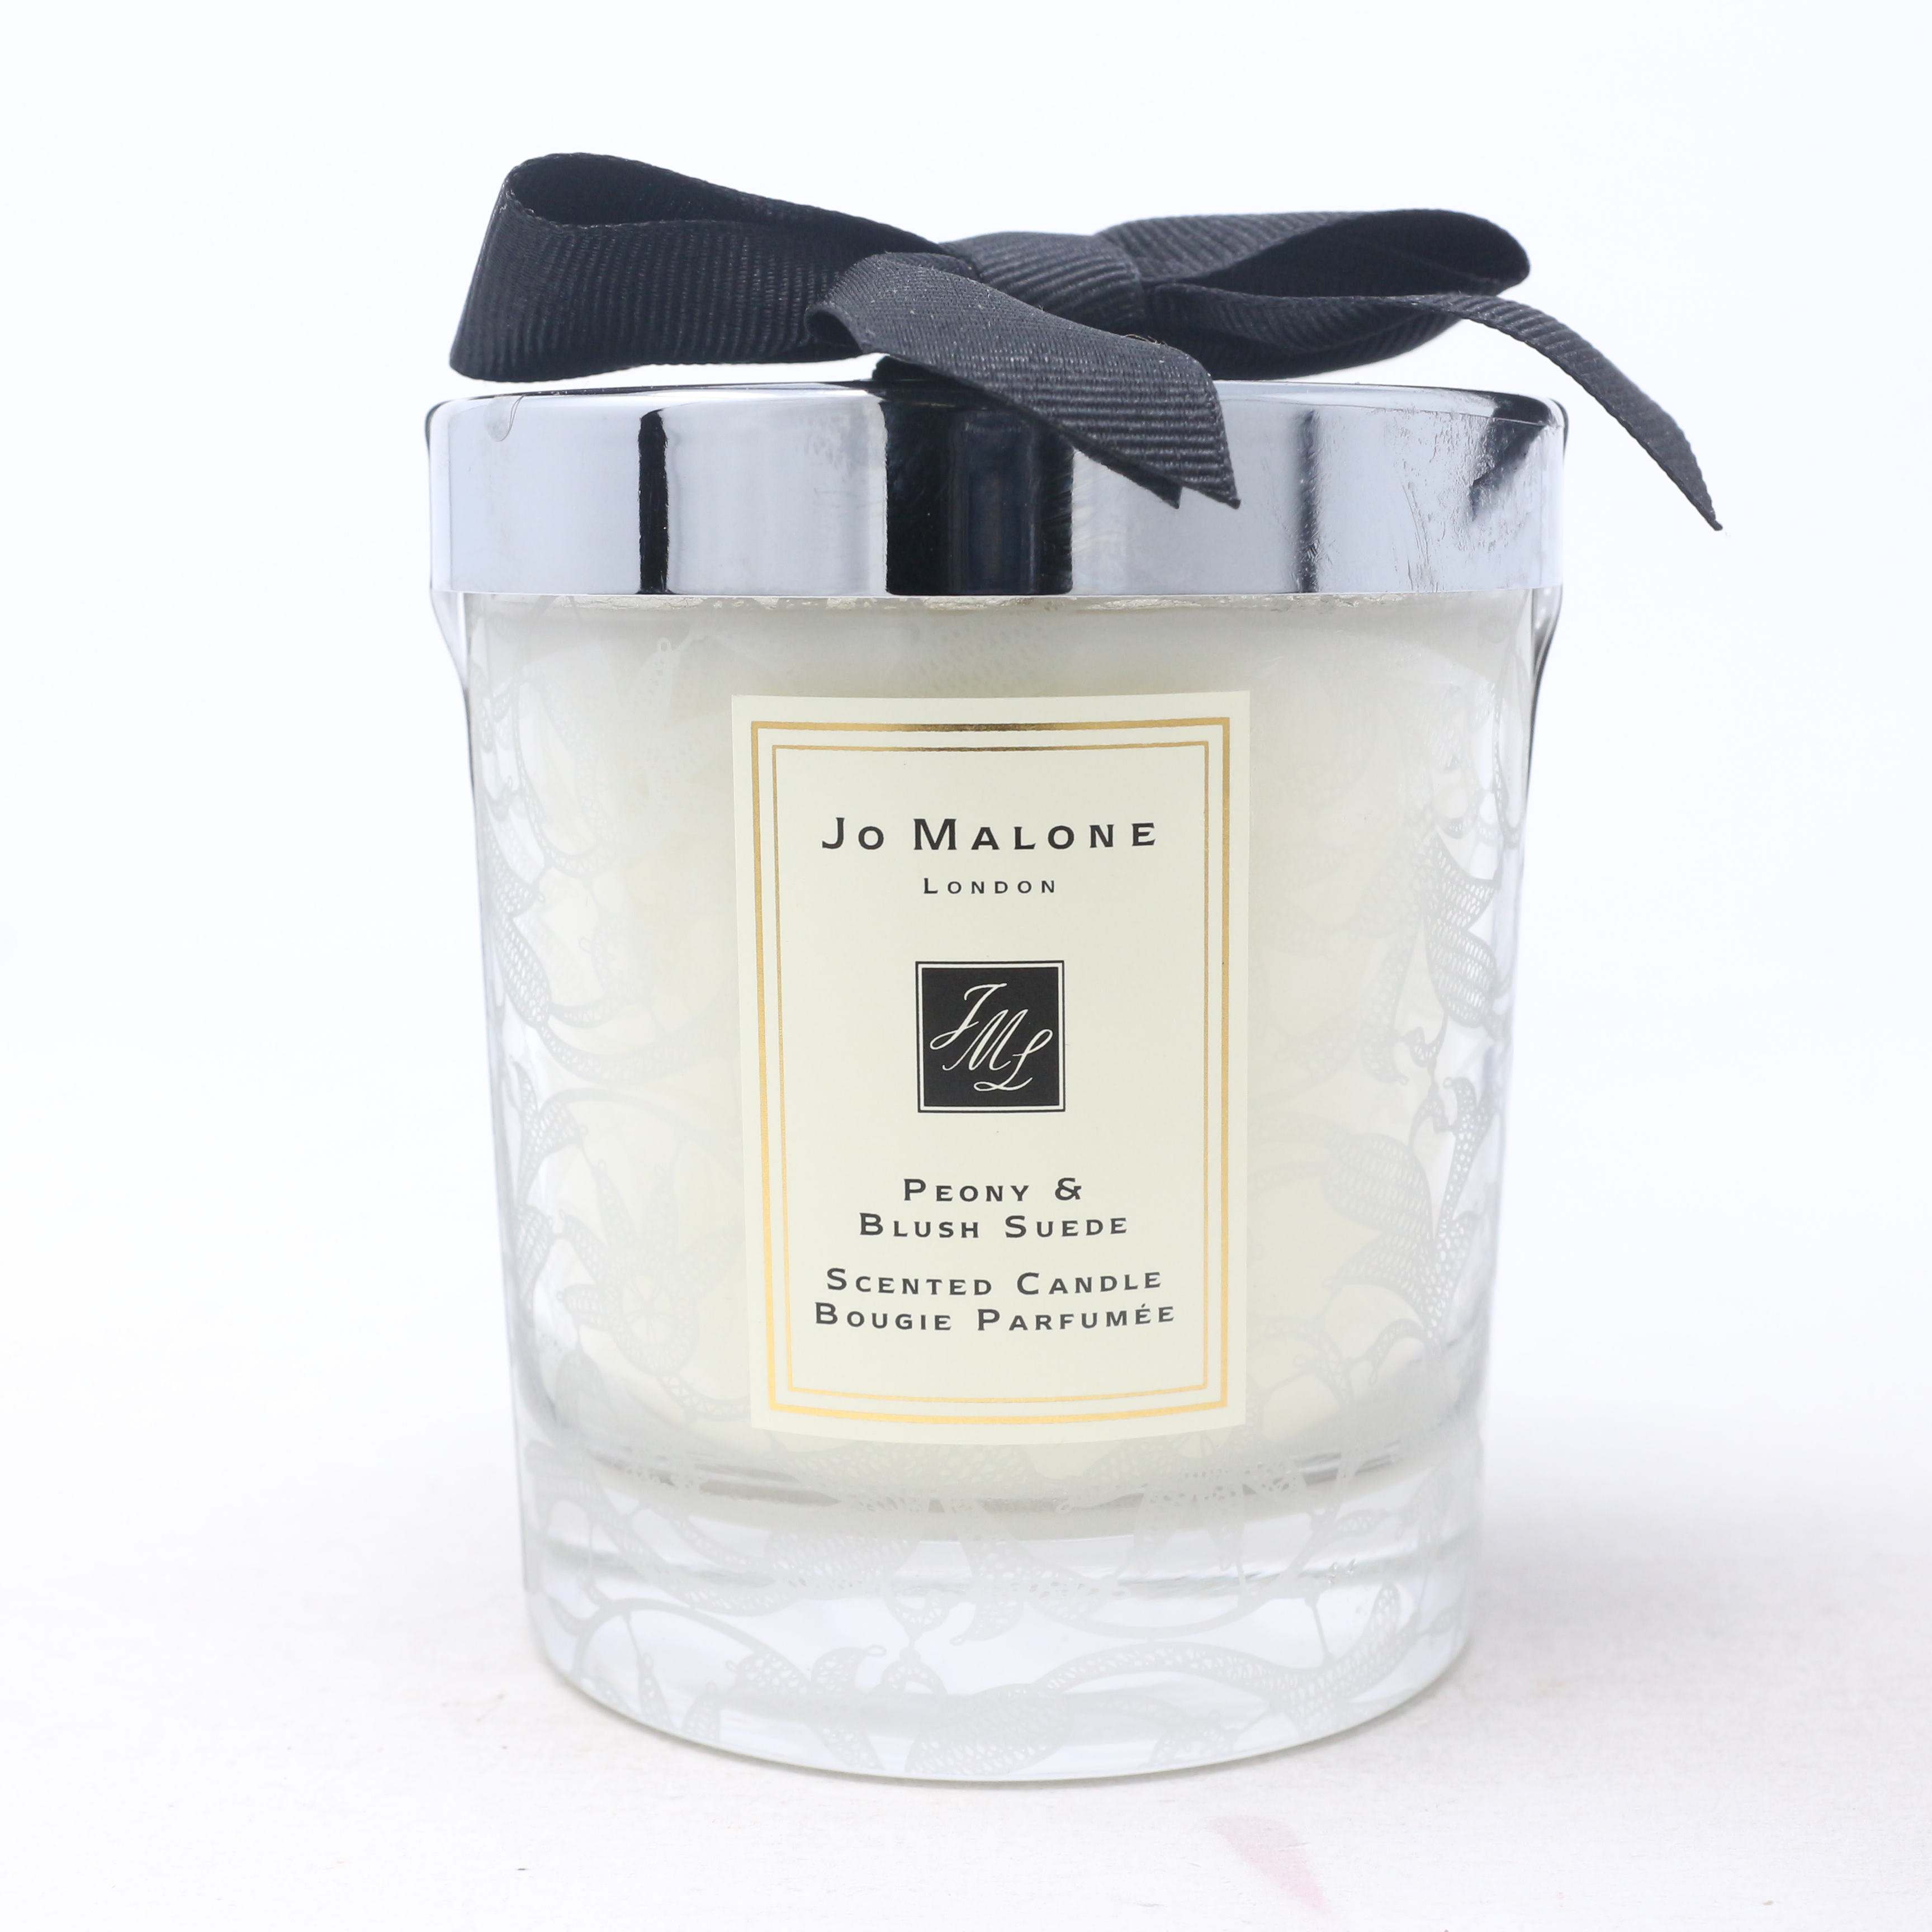 Jo Malone Peony & Blush Suede Scented Candle With Lace Design 7.0oz New ...